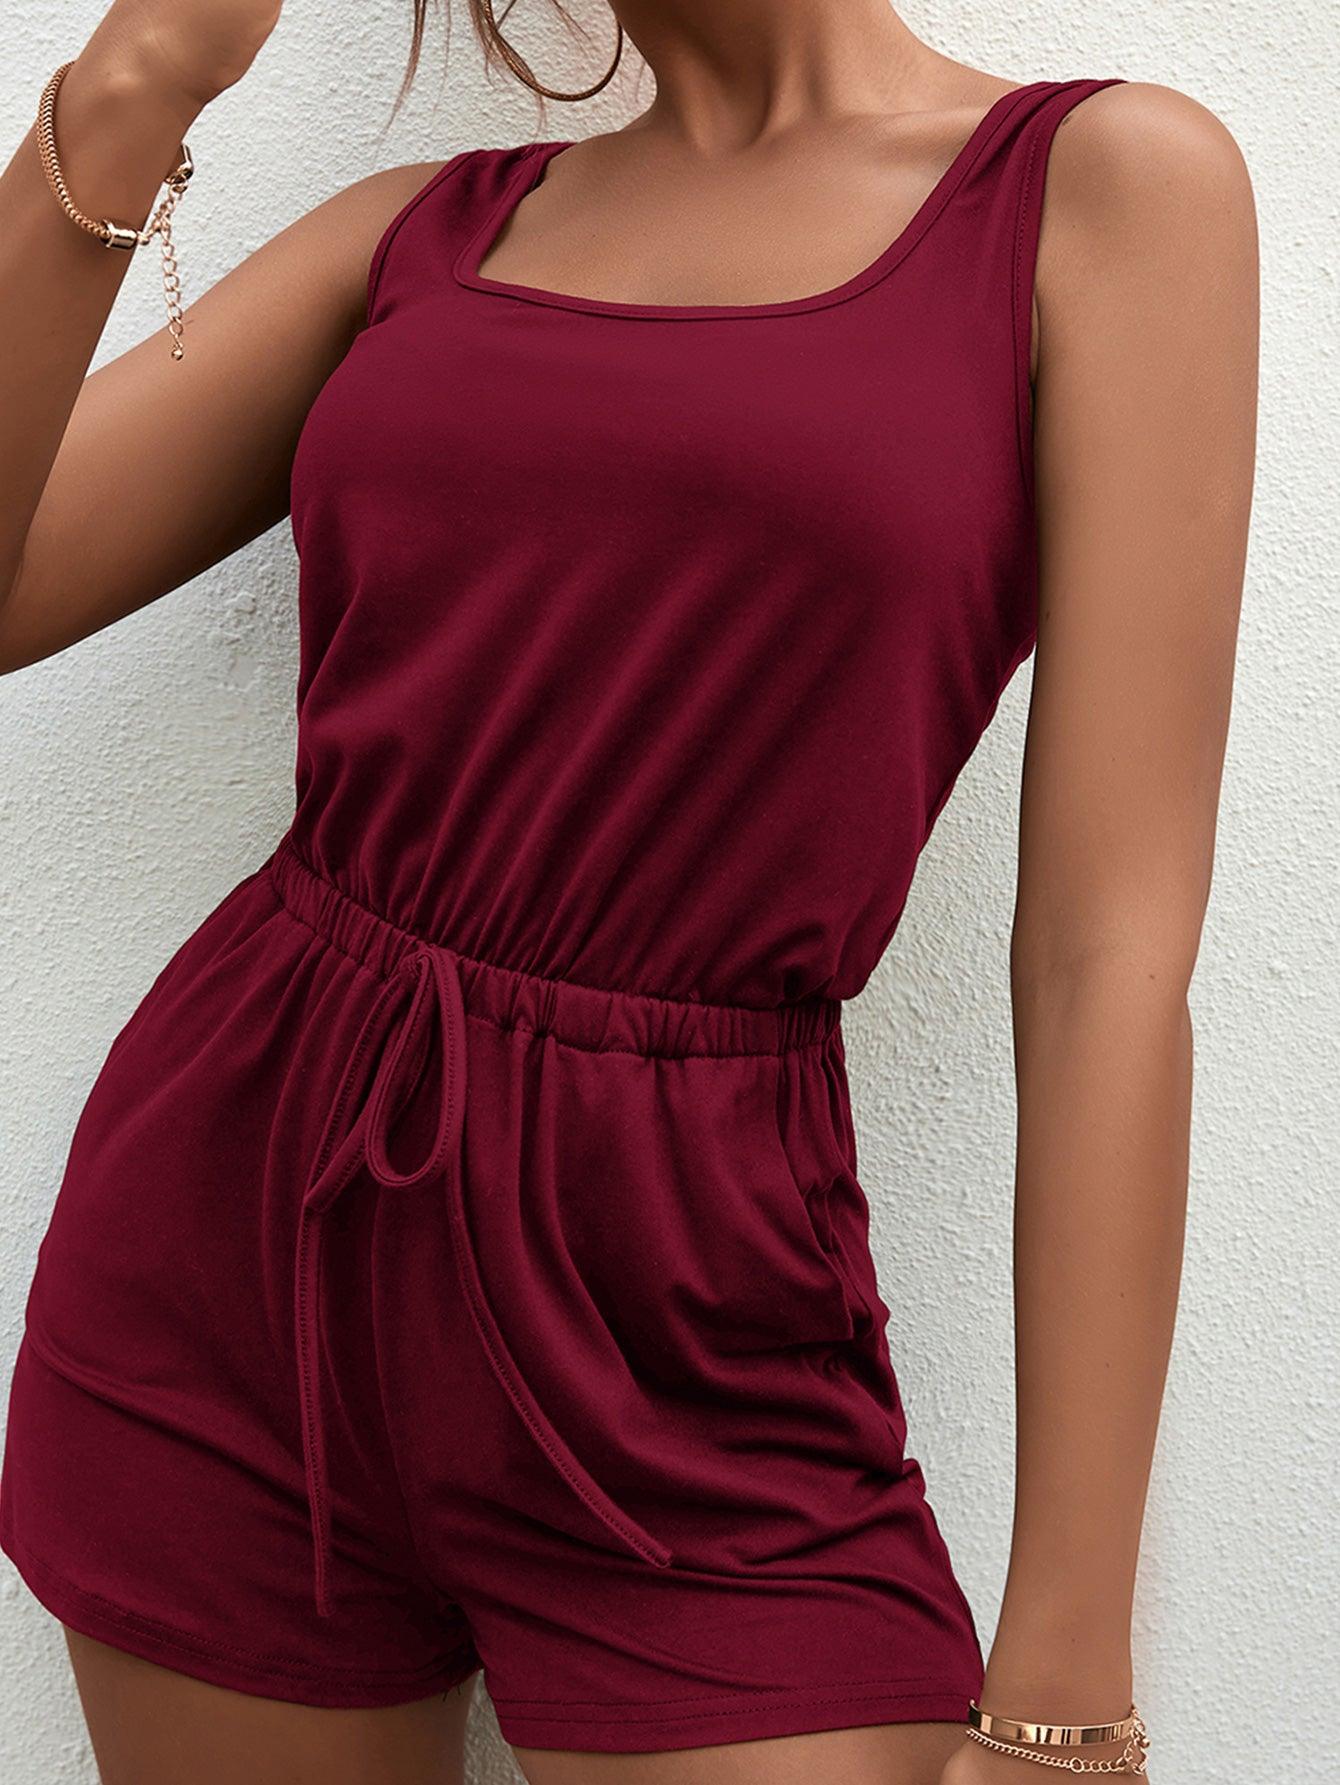 Square Neck Sleeveless Romper with Pockets - Lab Fashion, Home & Health